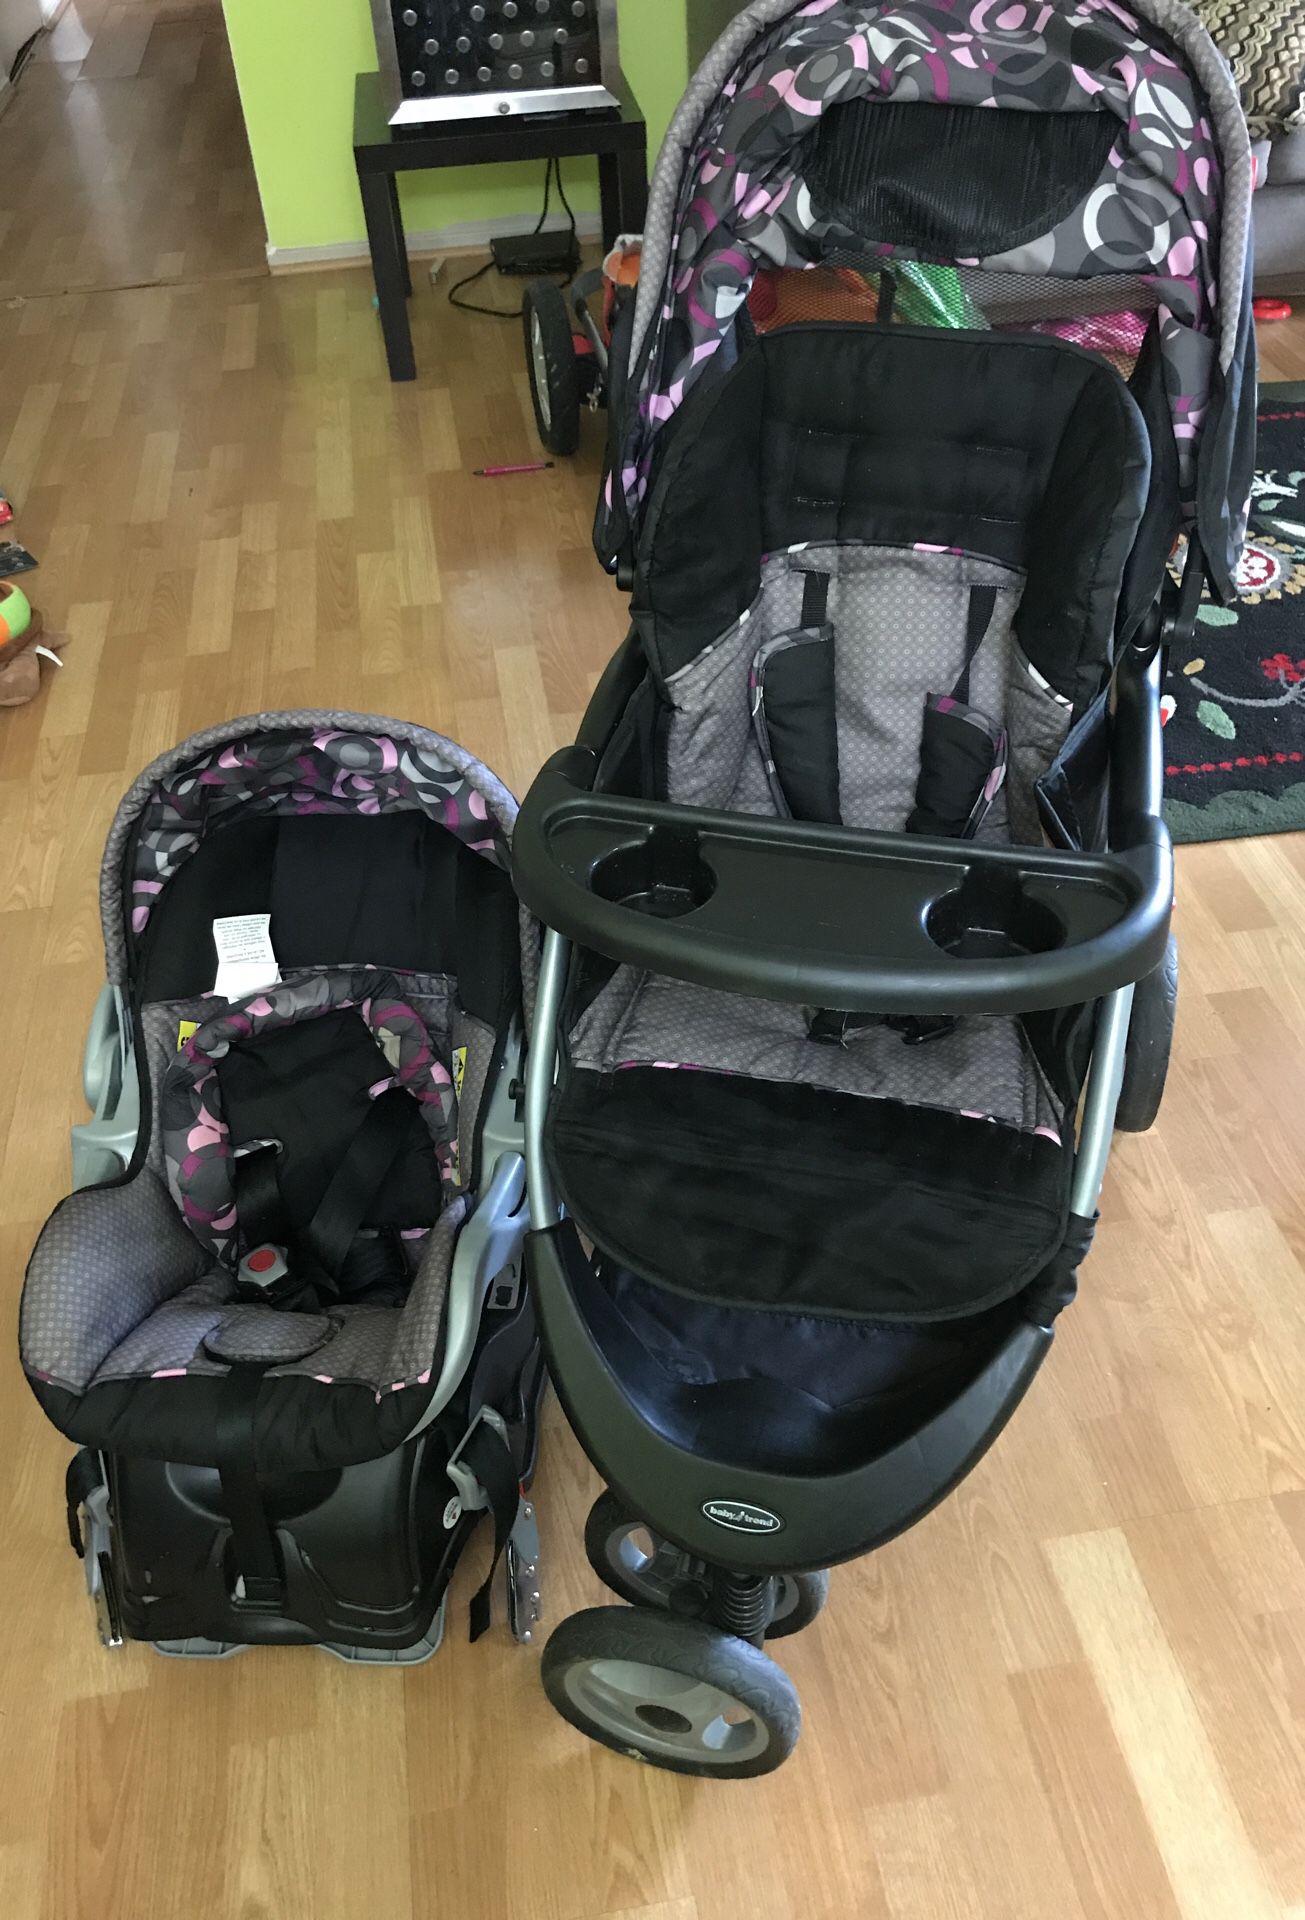 Stroller with 2 car seats